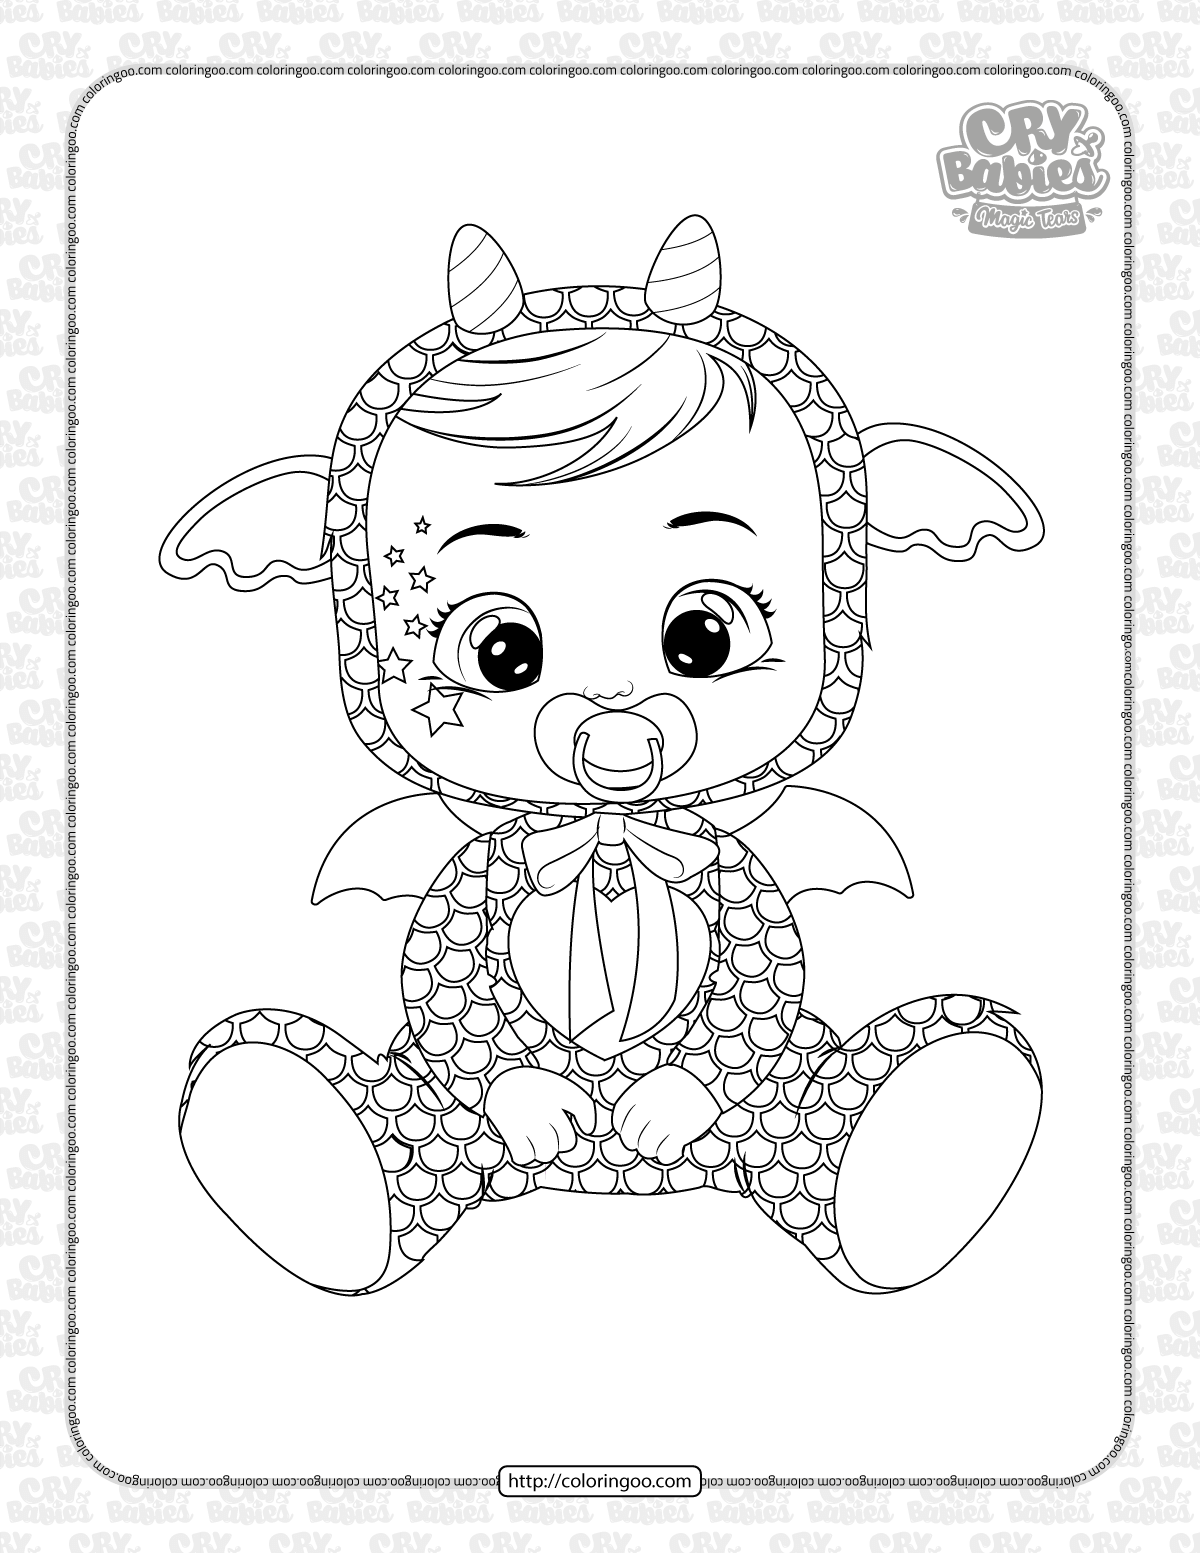 cry babies bruny coloring pages